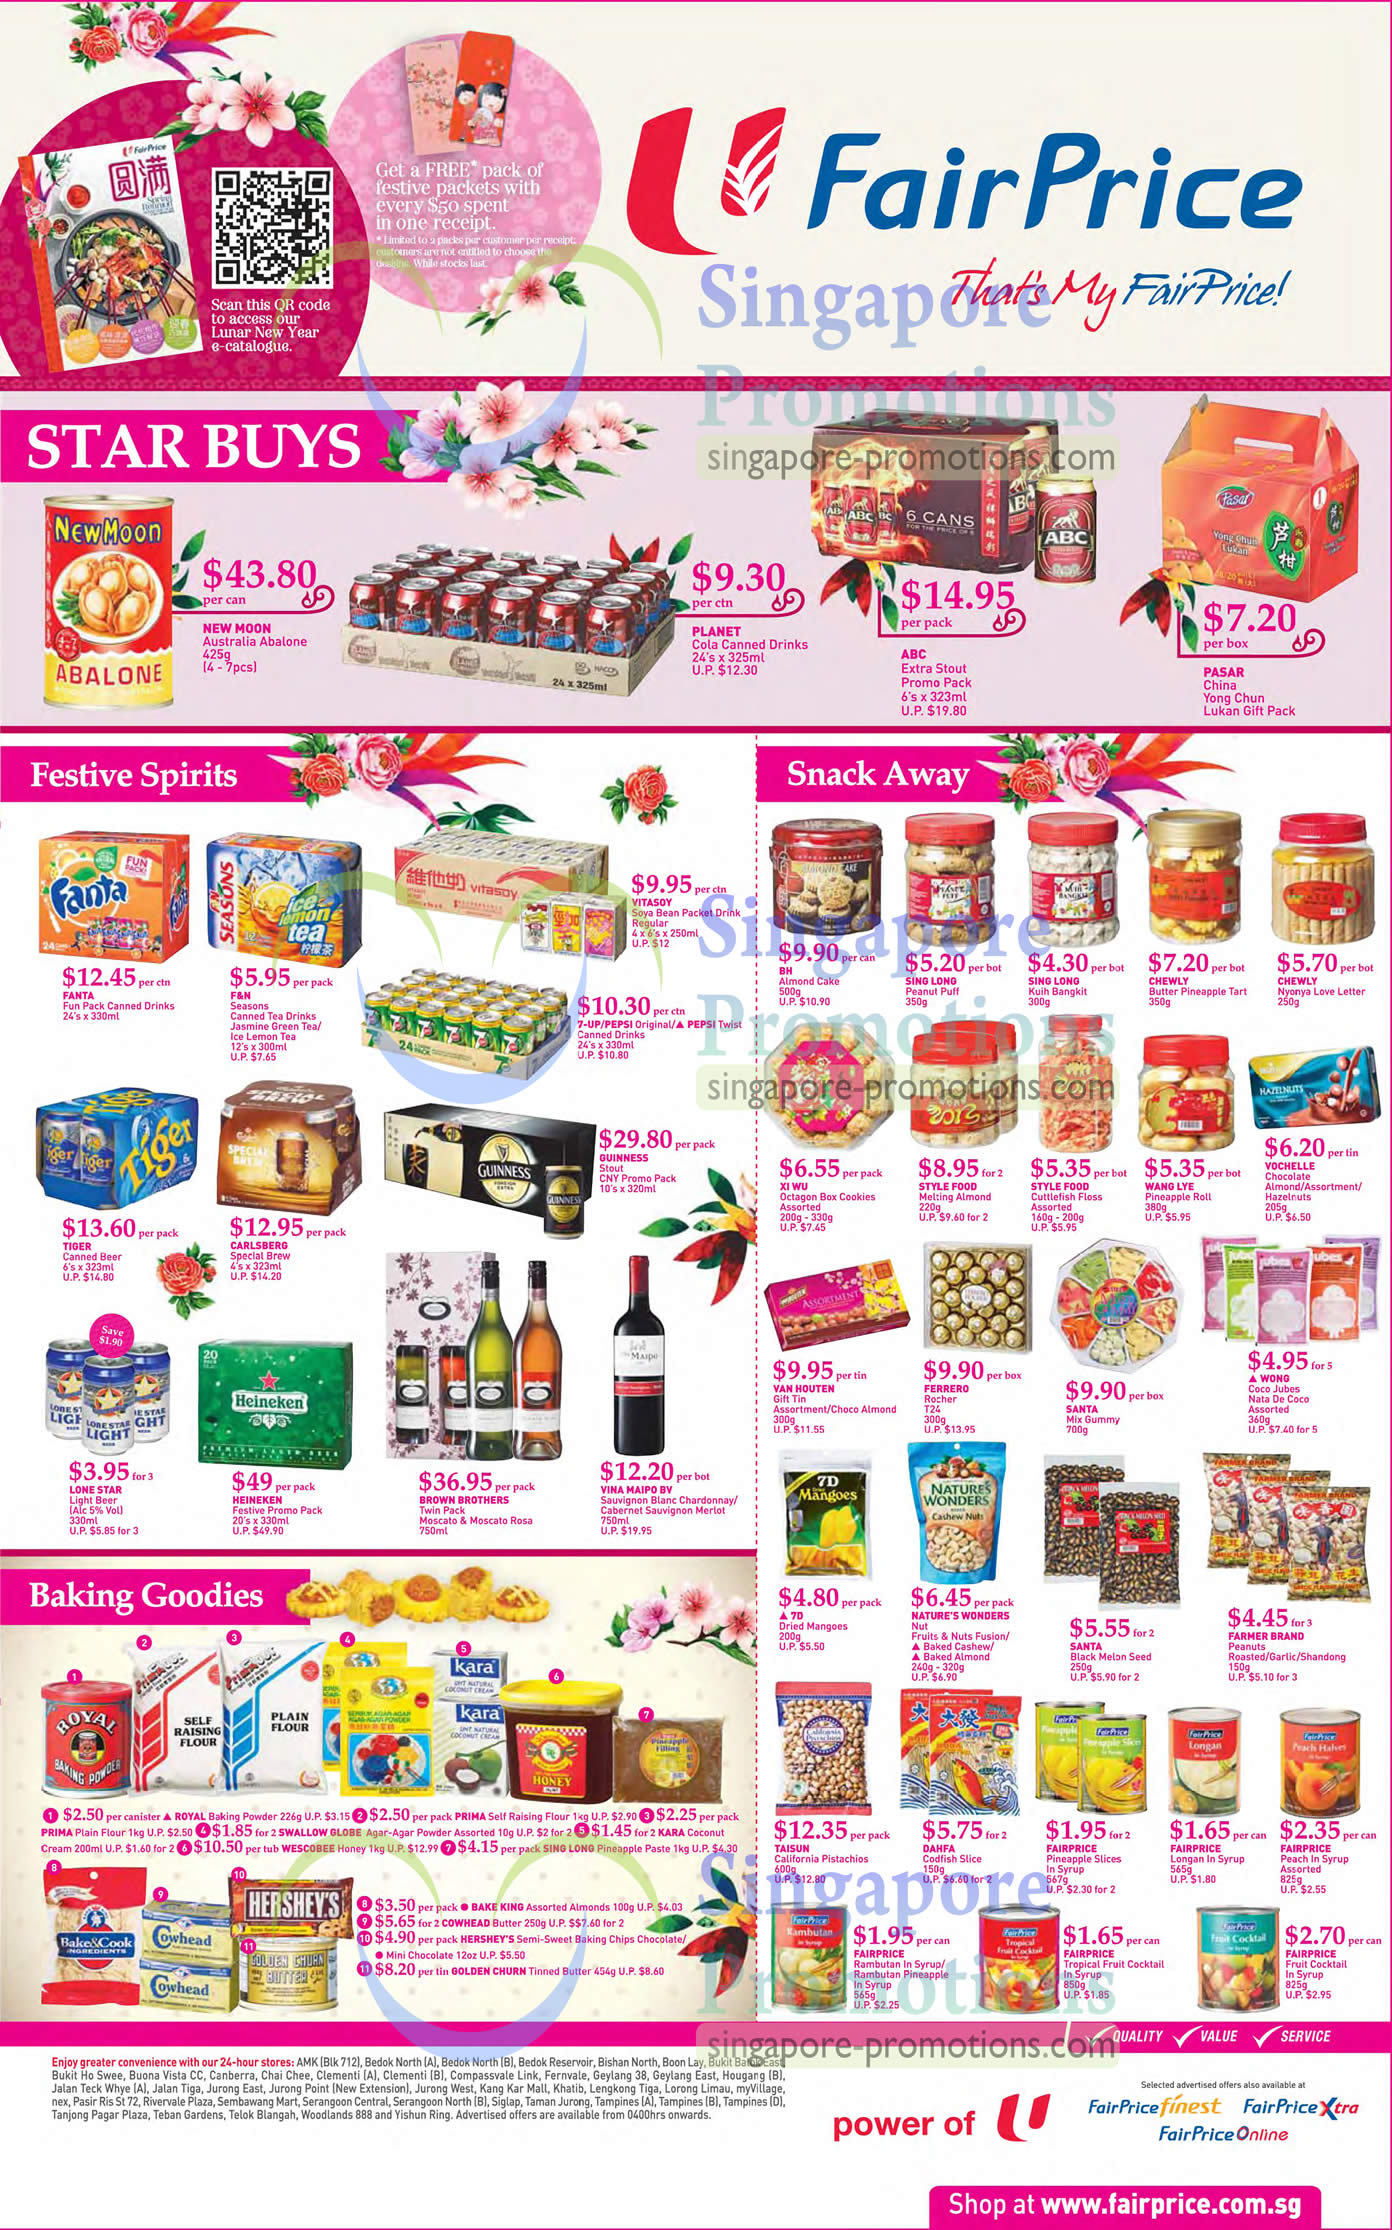 Featured image for NTUC Fairprice Abalone, Wines, Electronics, Appliances & Kitchenware Offers 17 - 30 Jan 2013